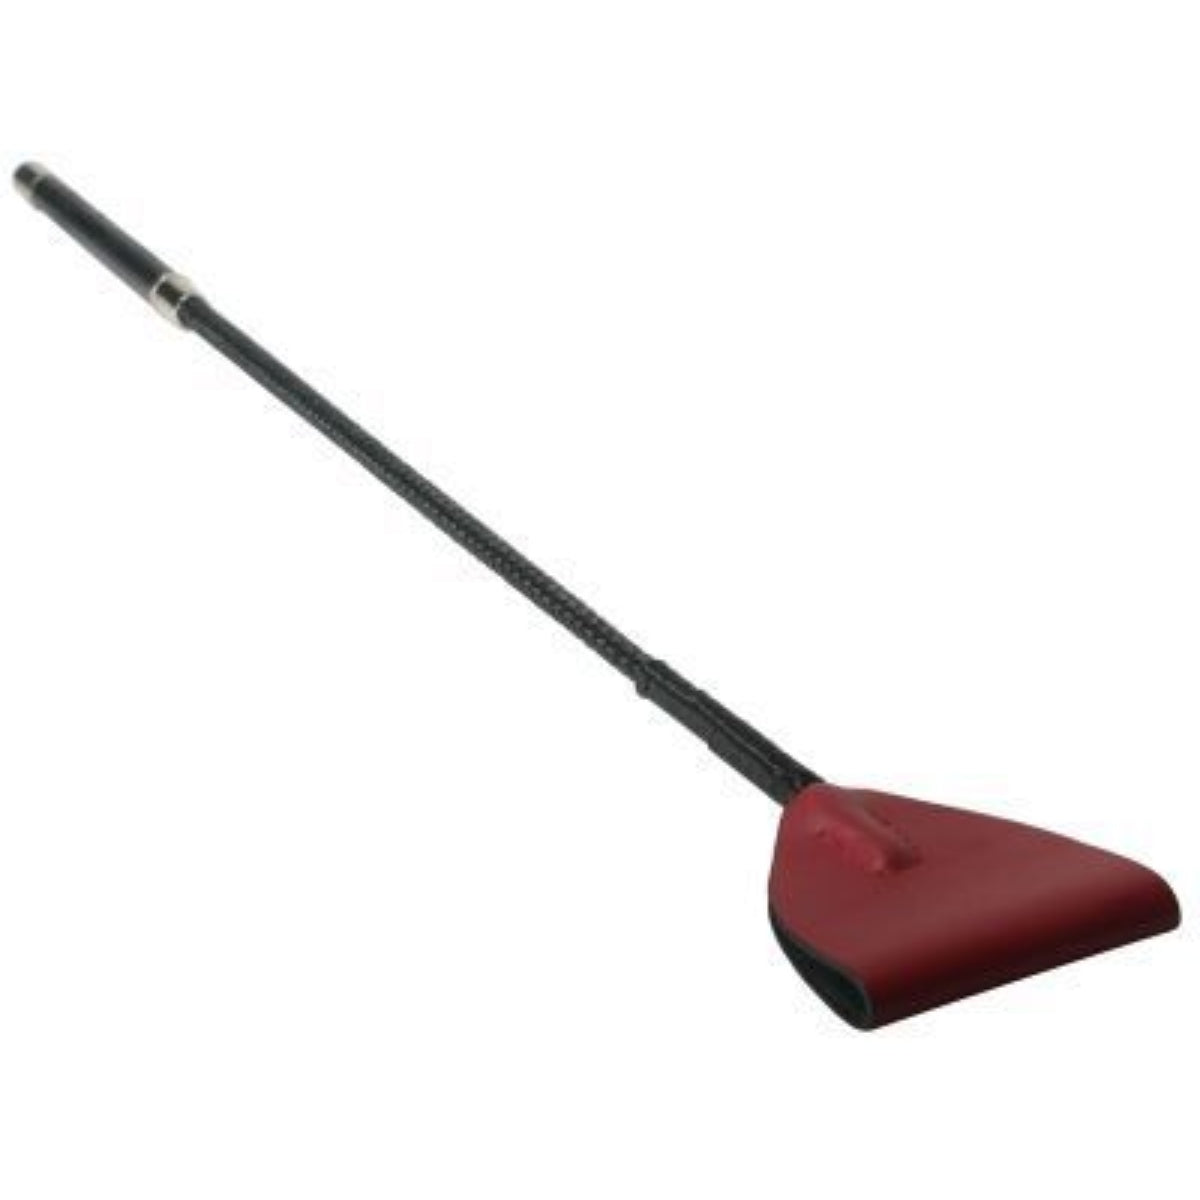 Master Series Red Mare Riding Crop Black Red